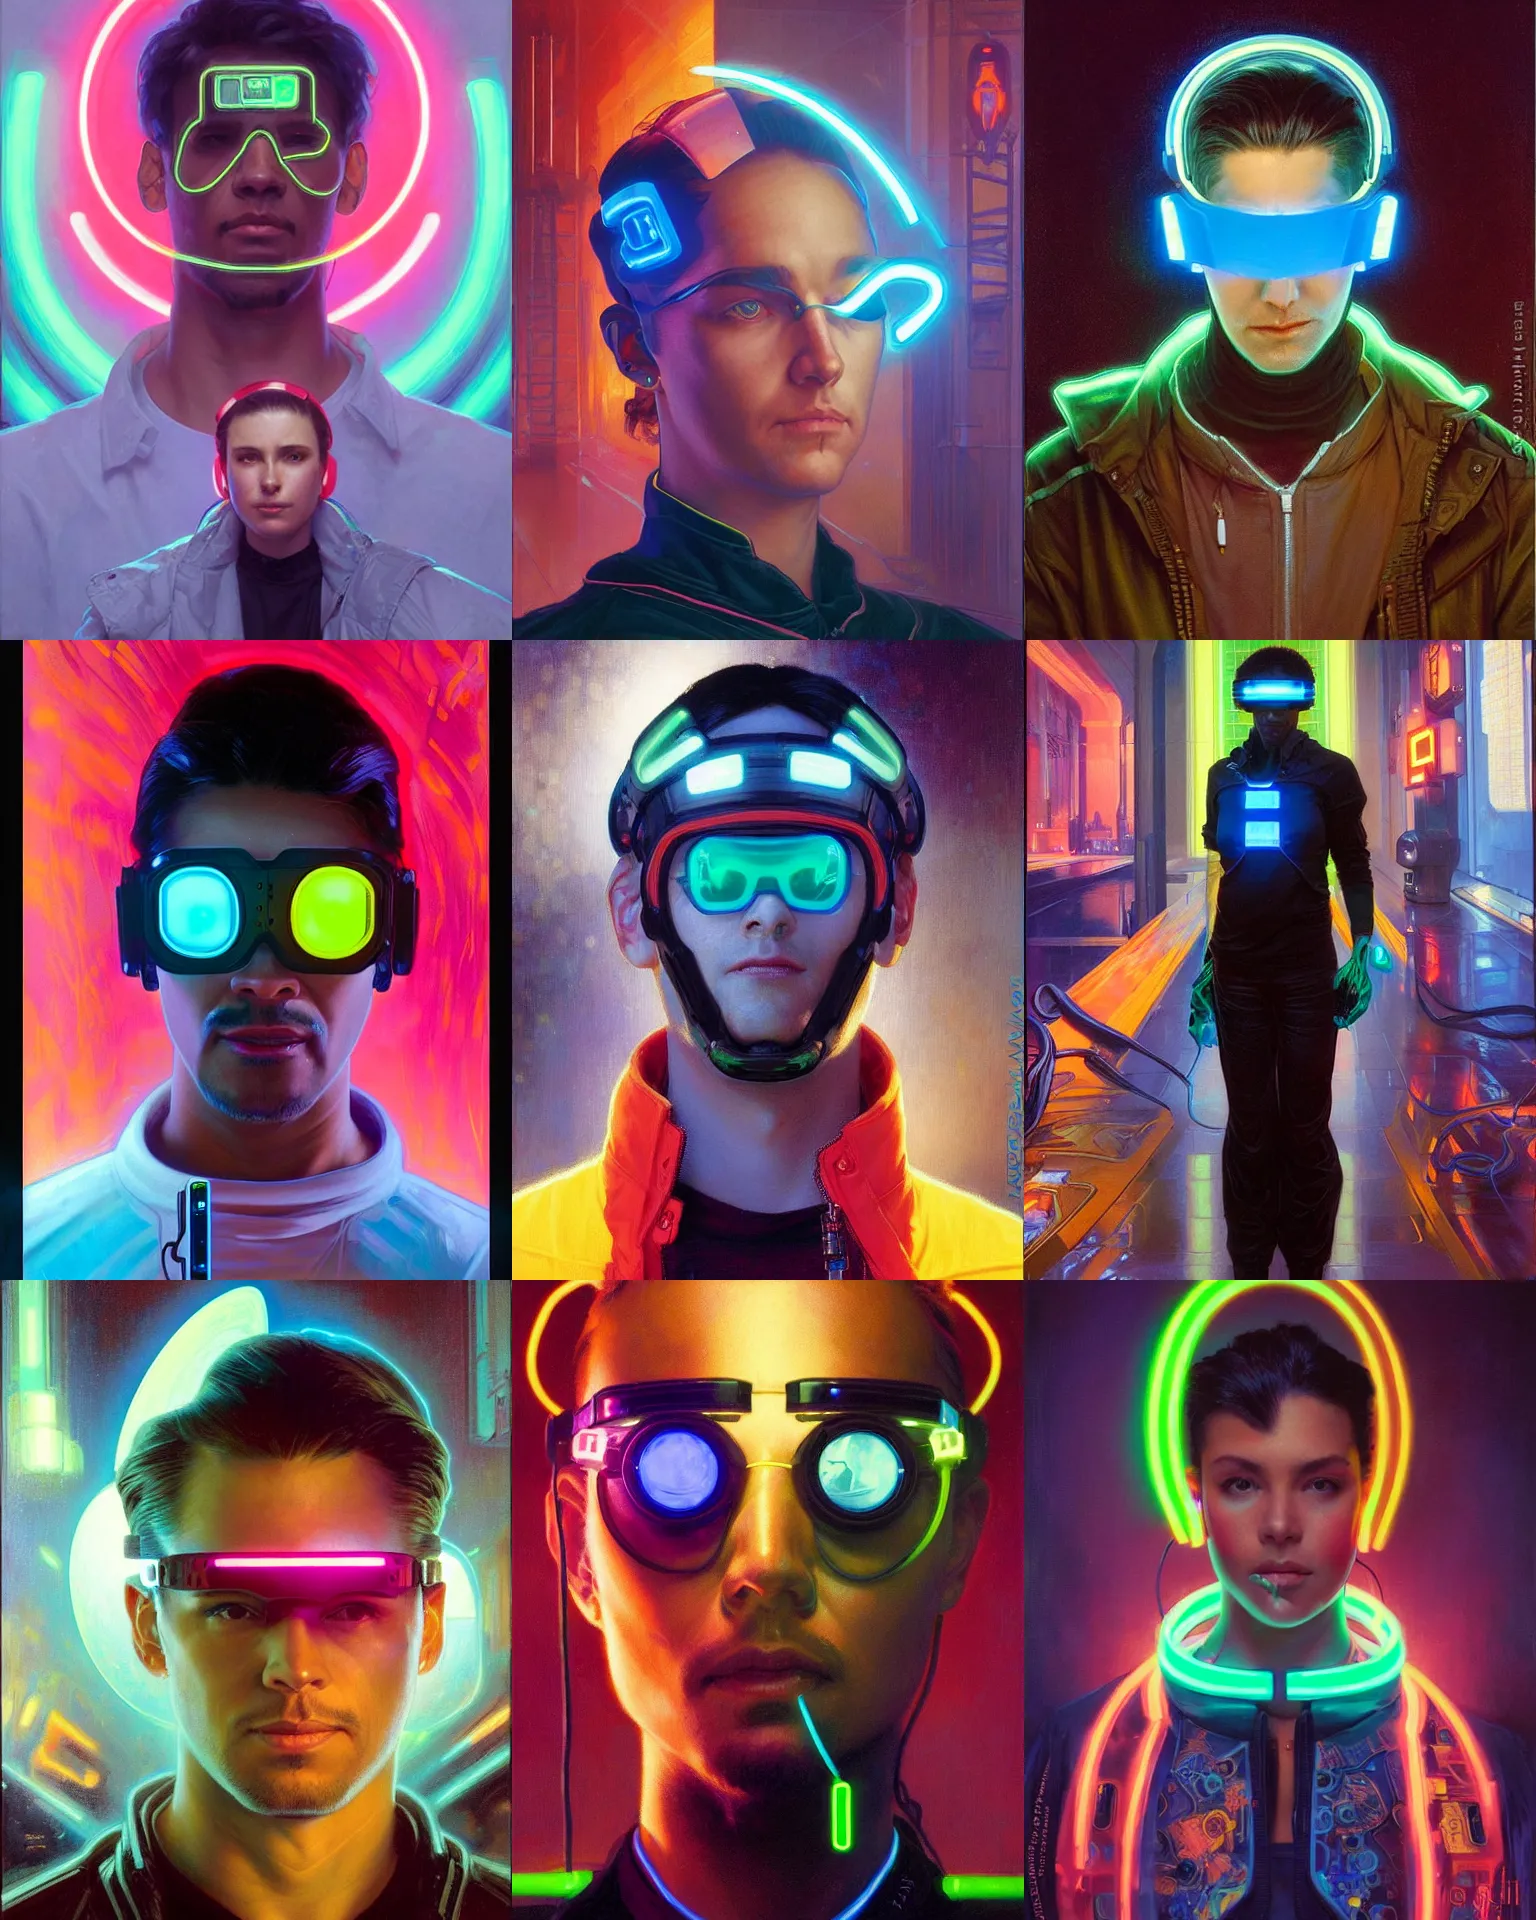 Prompt: neon cyberpunk hacker with glowing geordi visor over eyes and airpods headshot portrait painting by donato giancola, rhads, loish, alphonse mucha, mead schaeffer fashion photography